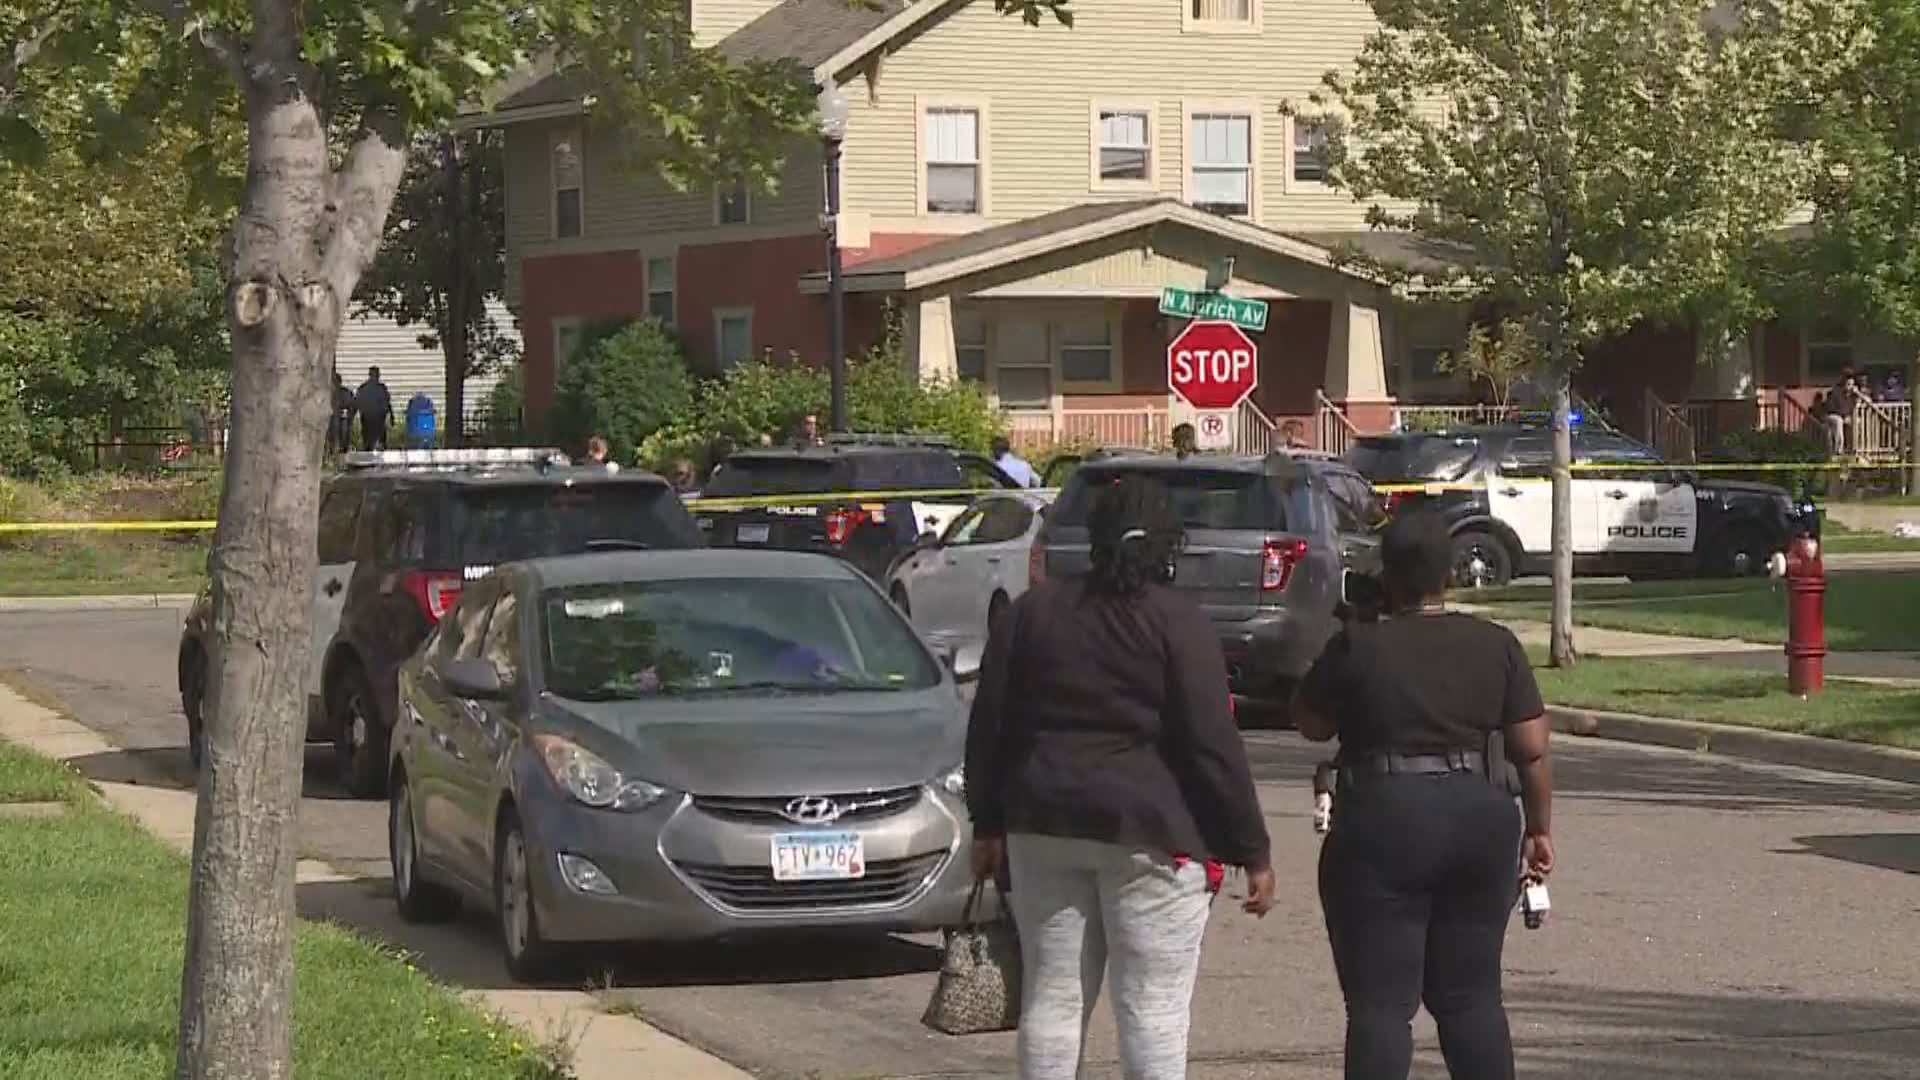 Police say early investigations show it was a "neighborhood pursuit that turned violent."